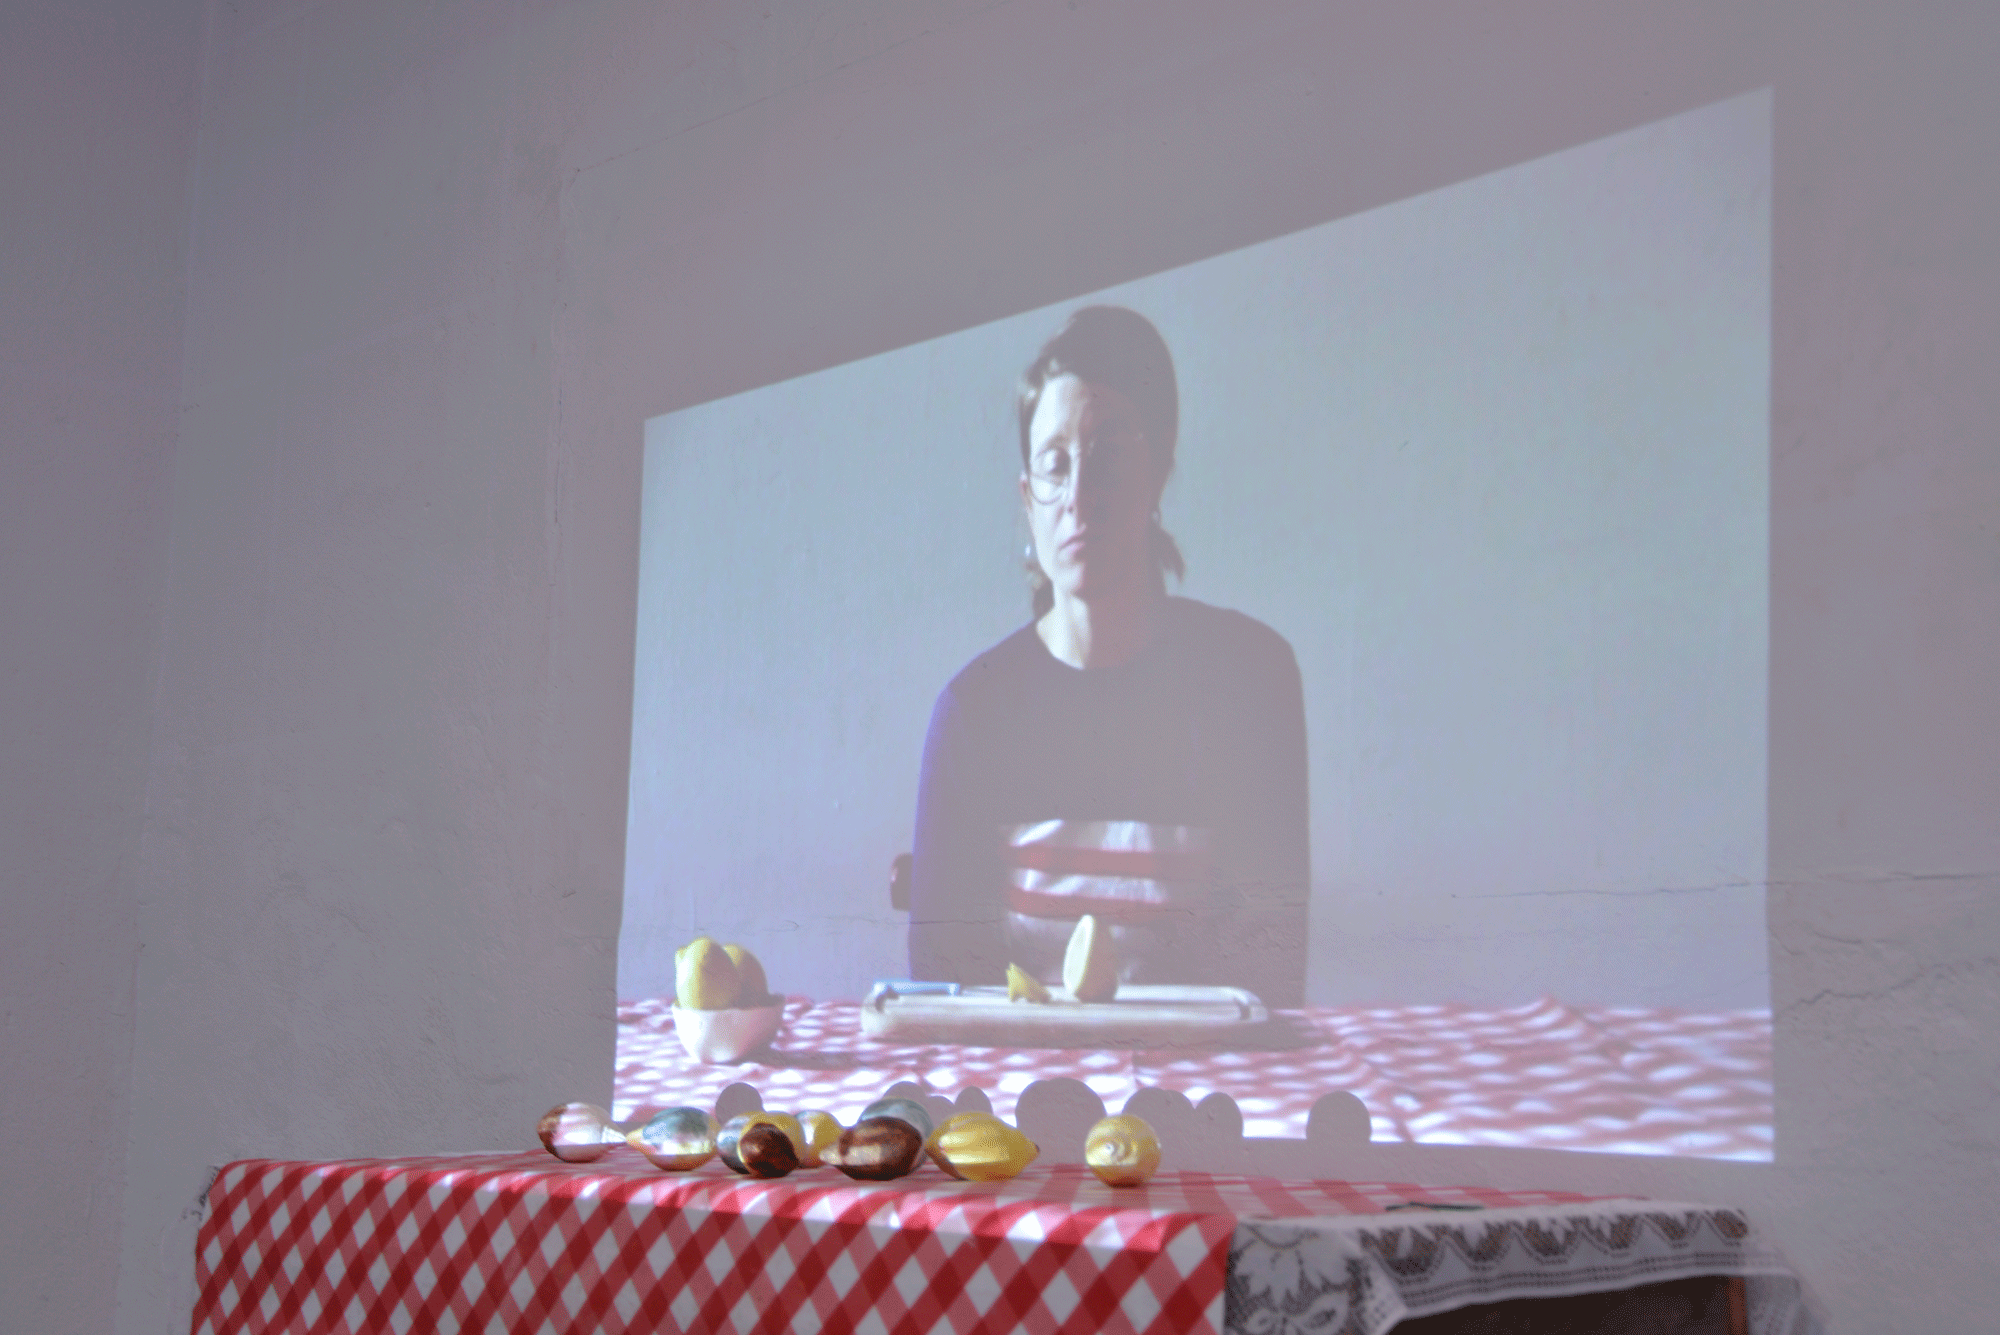 exhibition view, video and ceramic lemons by Angelina Seibert